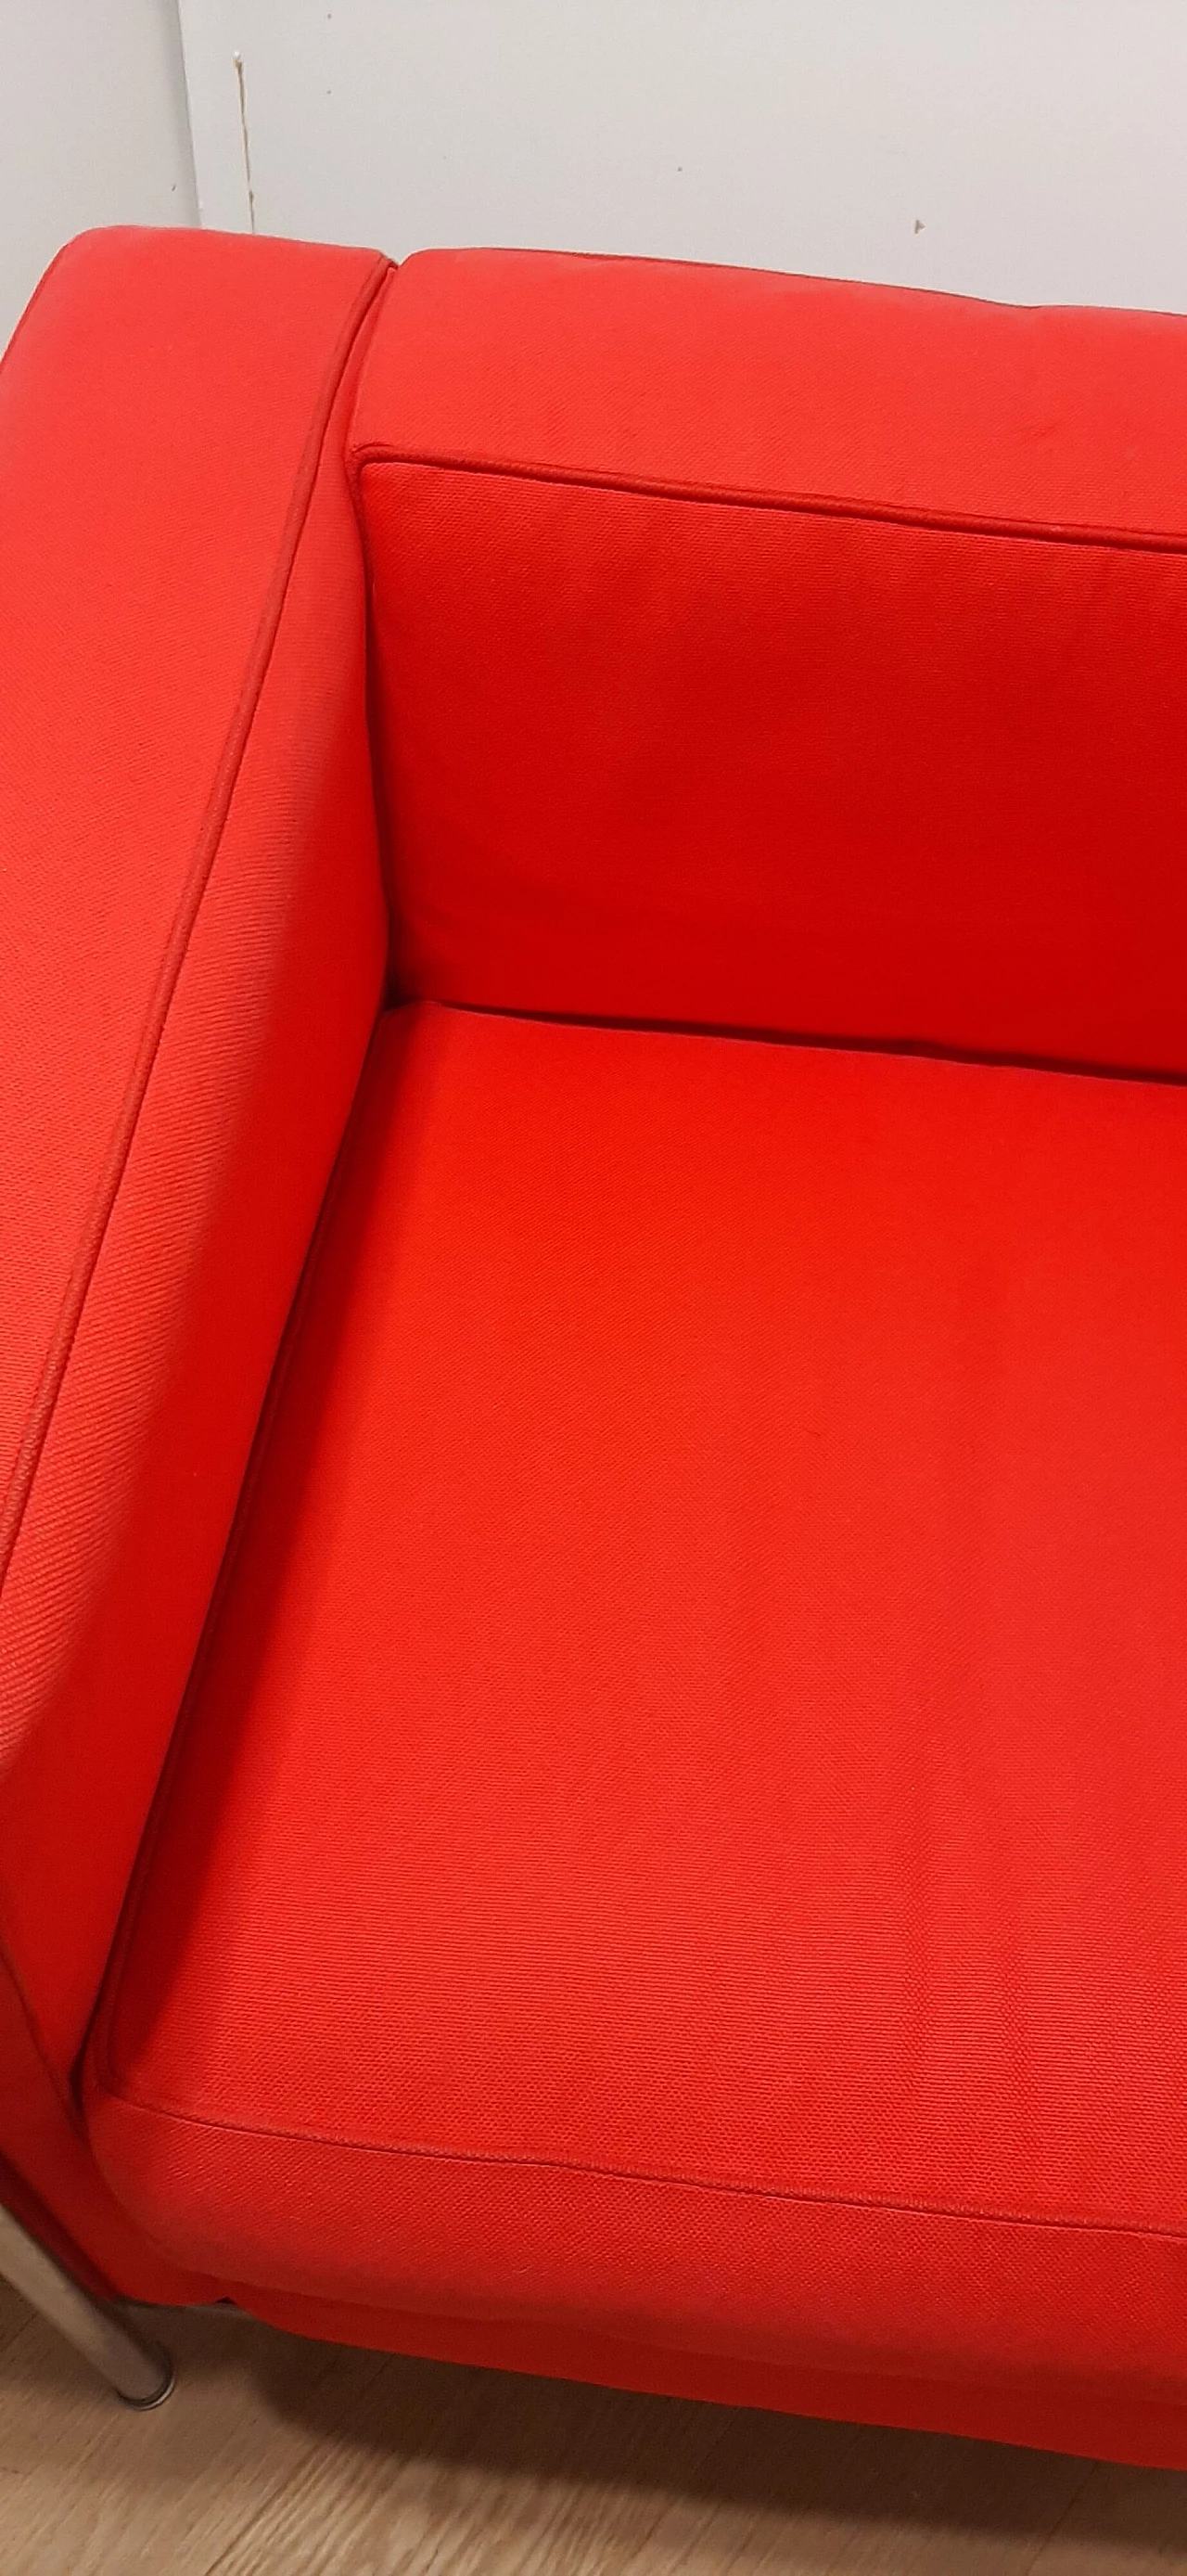 LC 2 armchair in red cotton by Le Corbusier, P. Jeanneret, C. Perriand for Alivar, 1980s 38